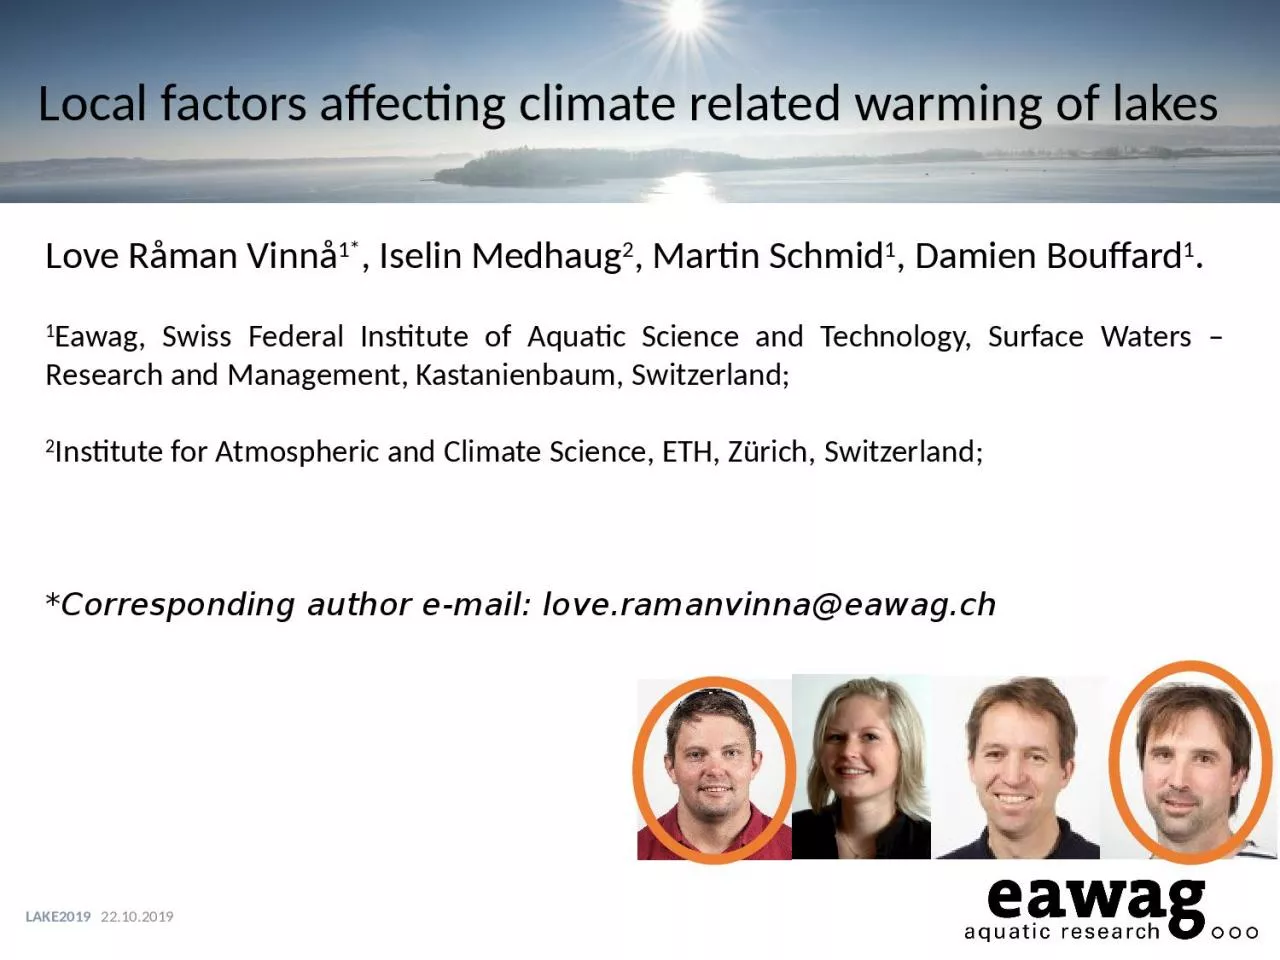 Local factors affecting climate related warming of lakes